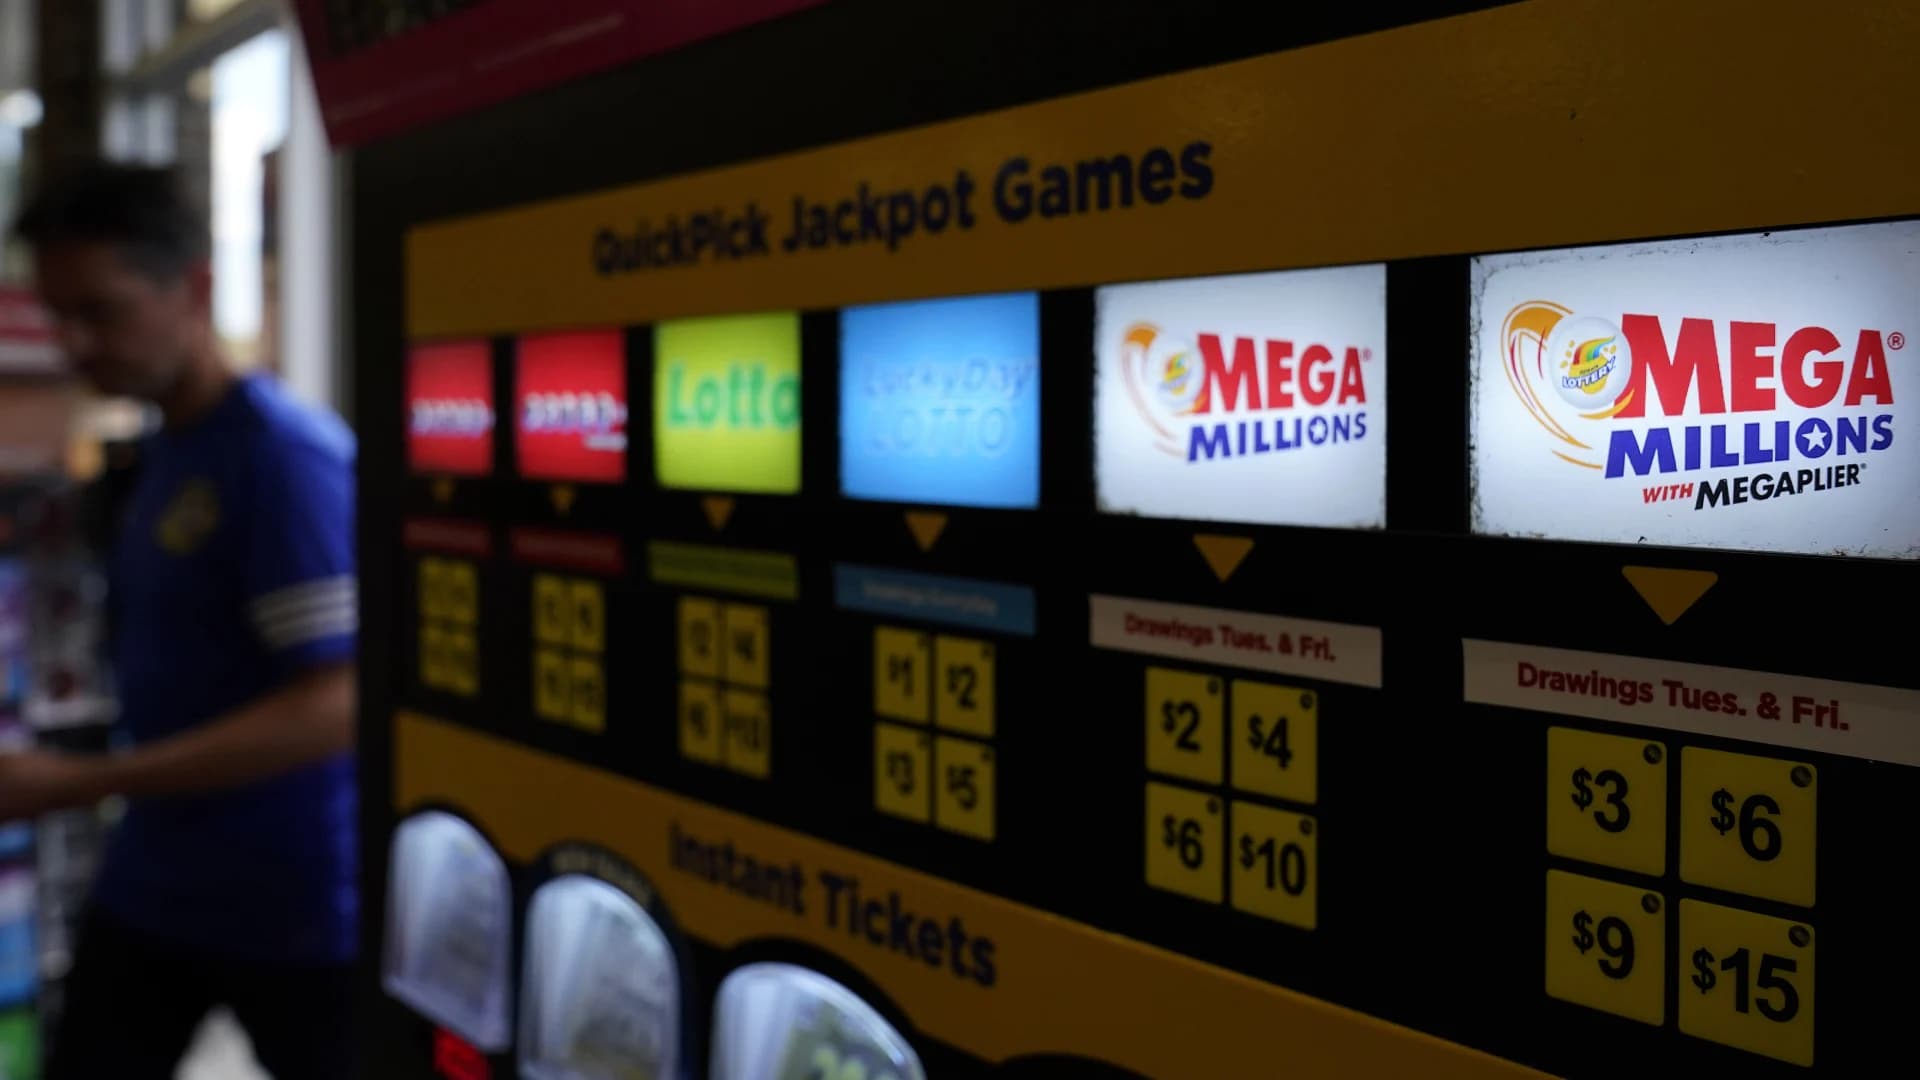 Confused by the huge Mega Millions prize? Here are some answers